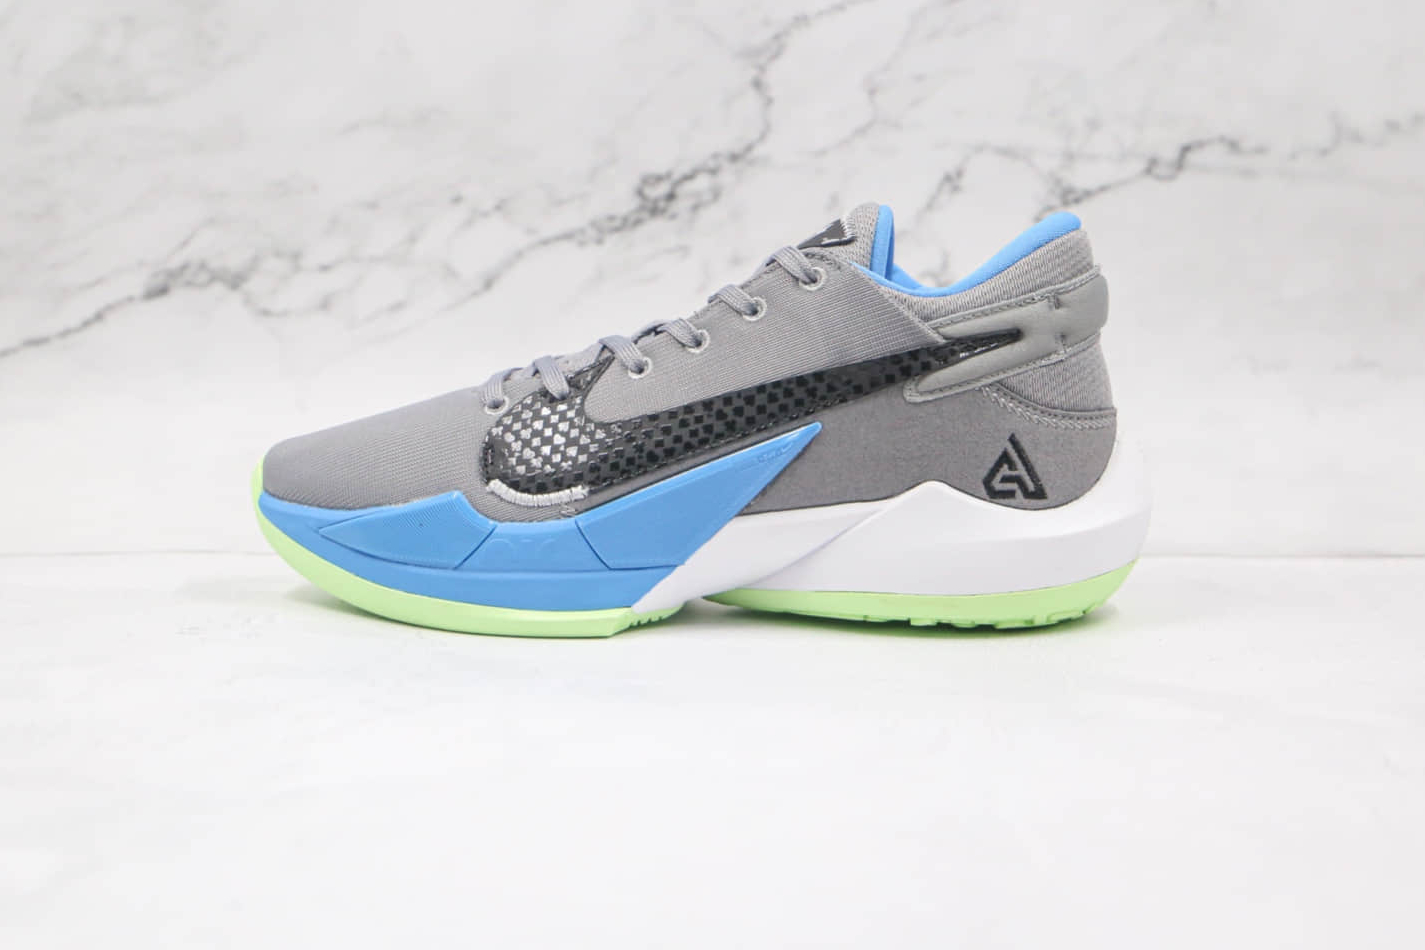 Nike Zoom Freak 2 'Particle Grey' CK5424-004 - Shop Now for Premium Performance and Style.